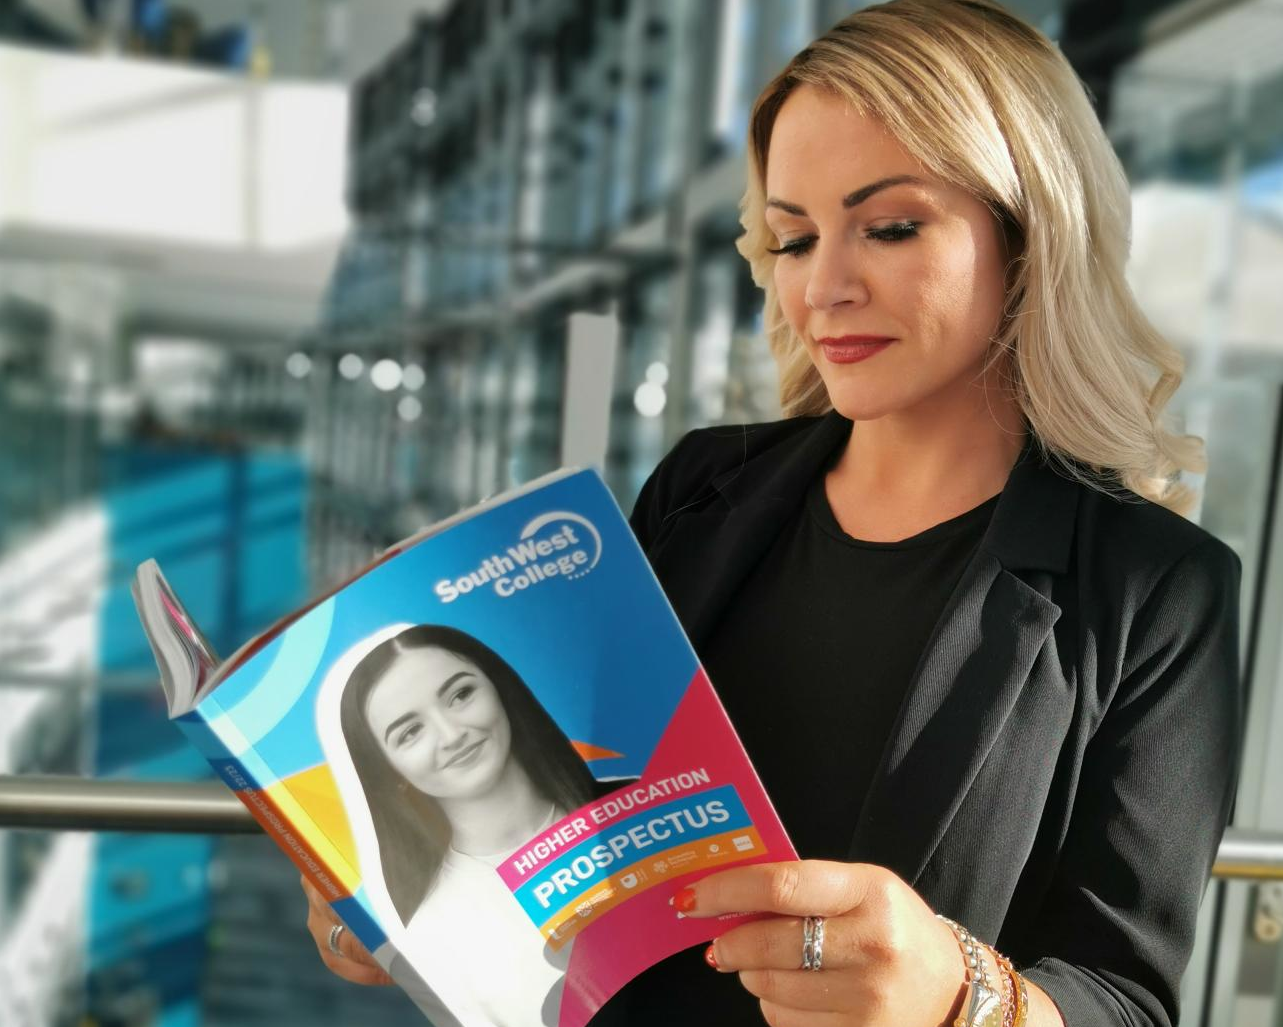 South West College's 2022 Higher Education Prospectus Now Available ...